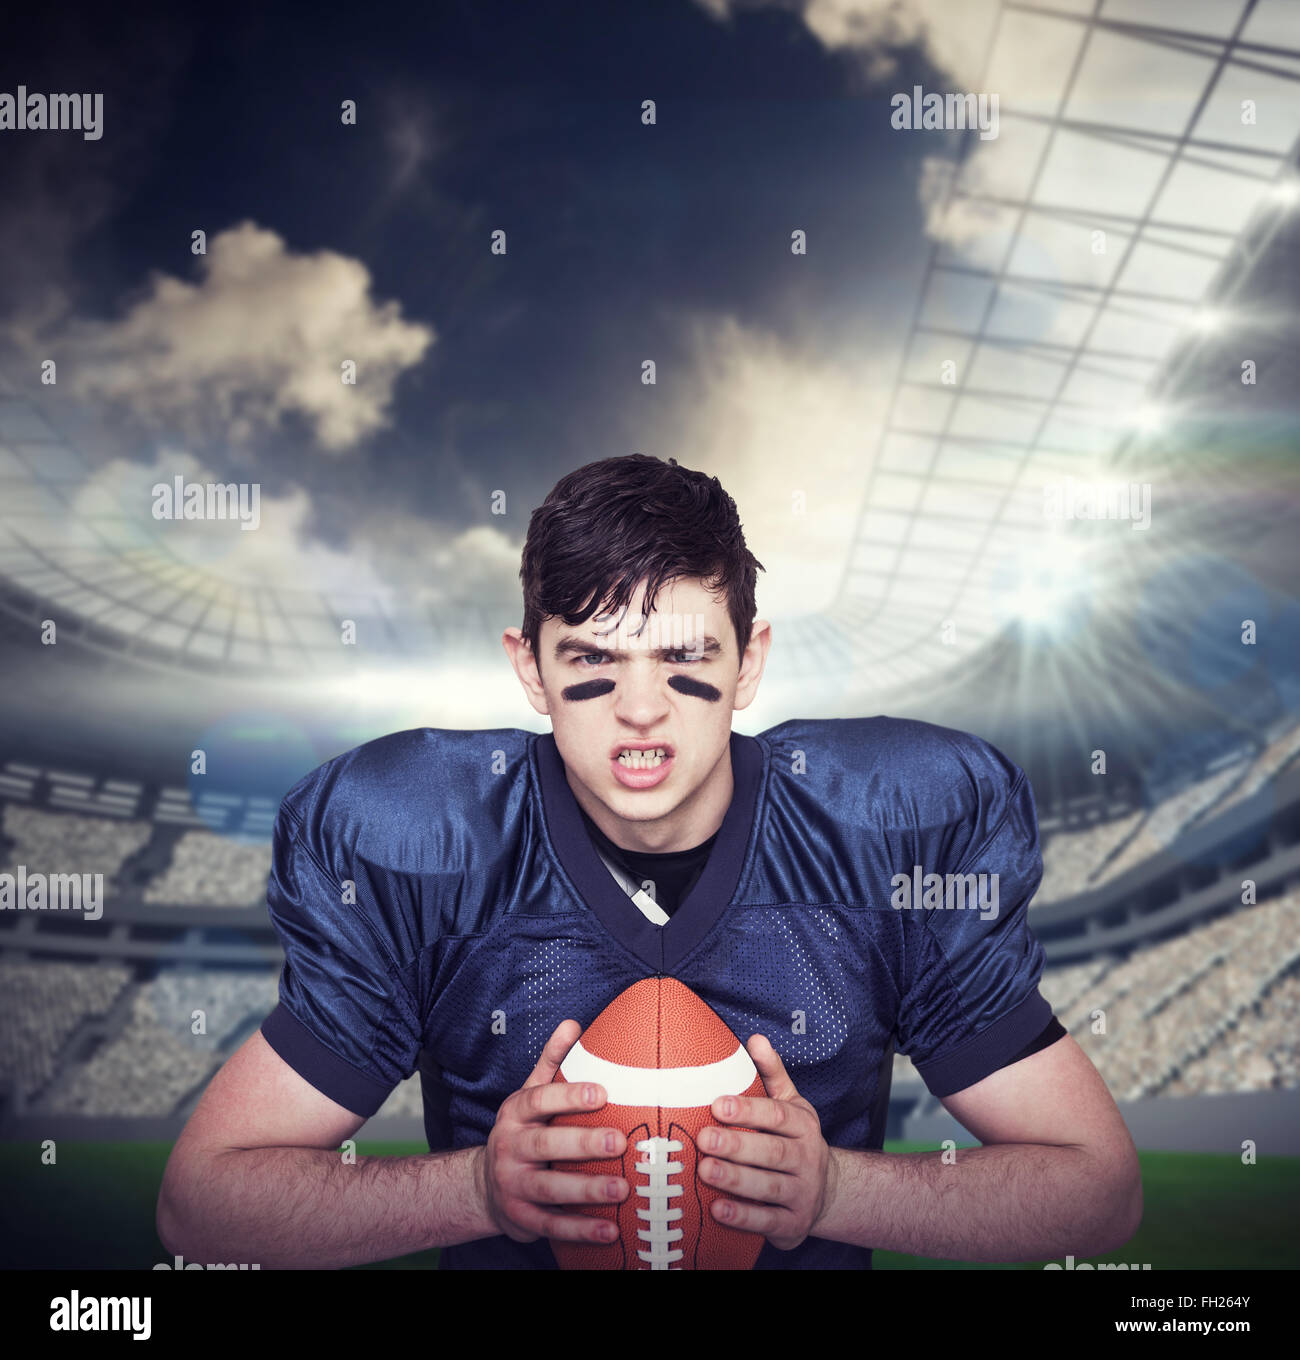 Composite image of enraged american football player holding a ball Stock Photo